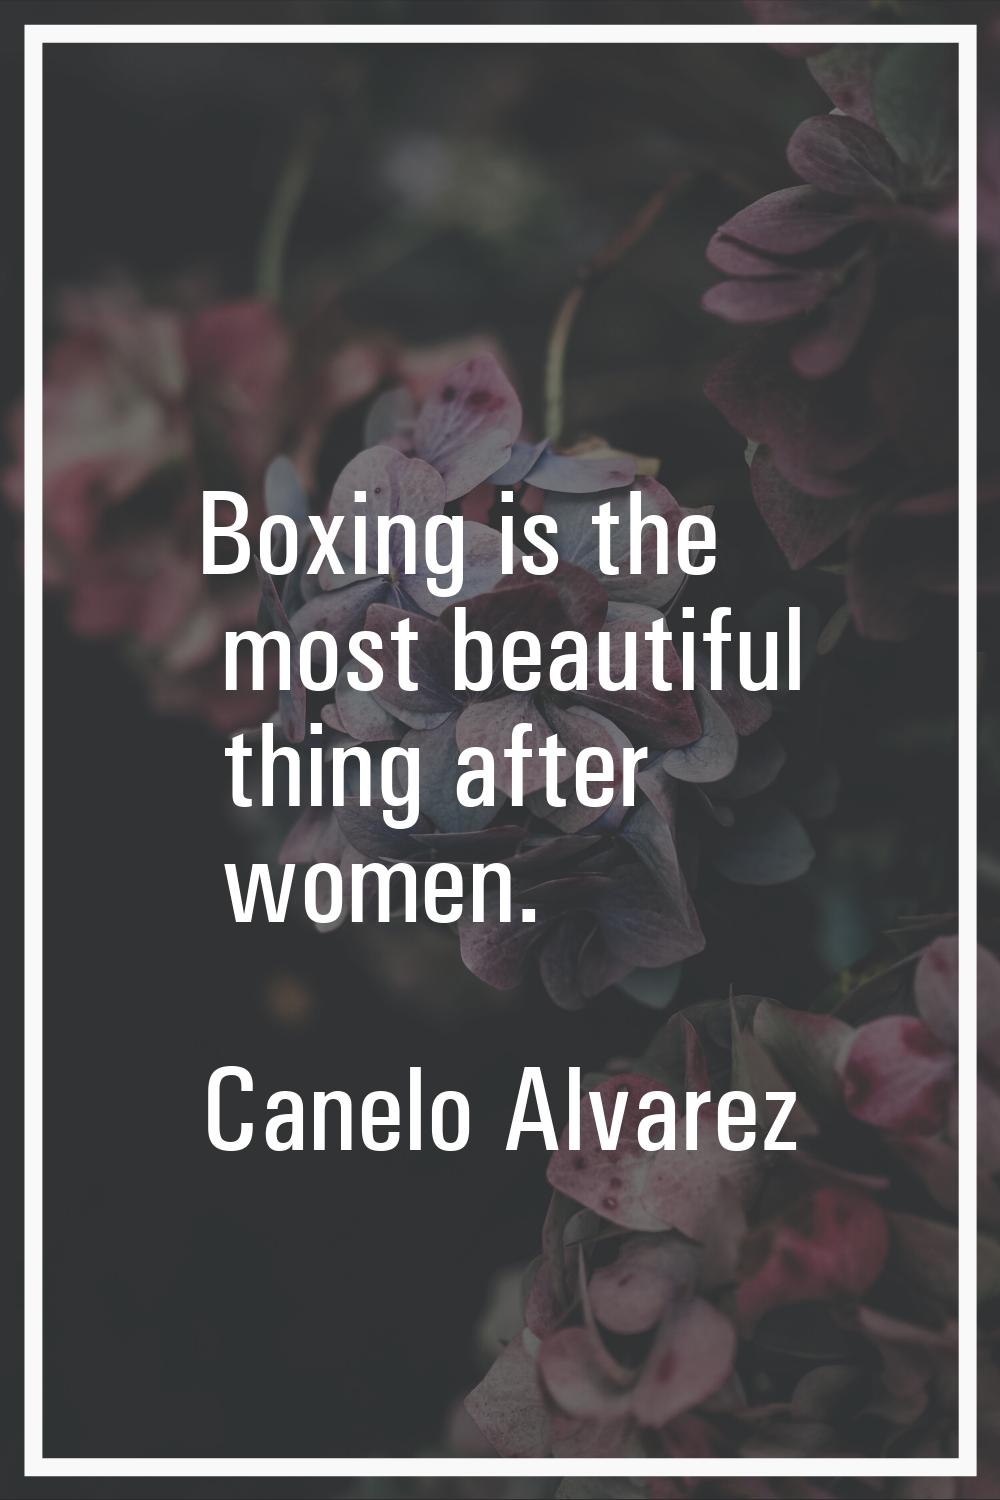 Boxing is the most beautiful thing after women.